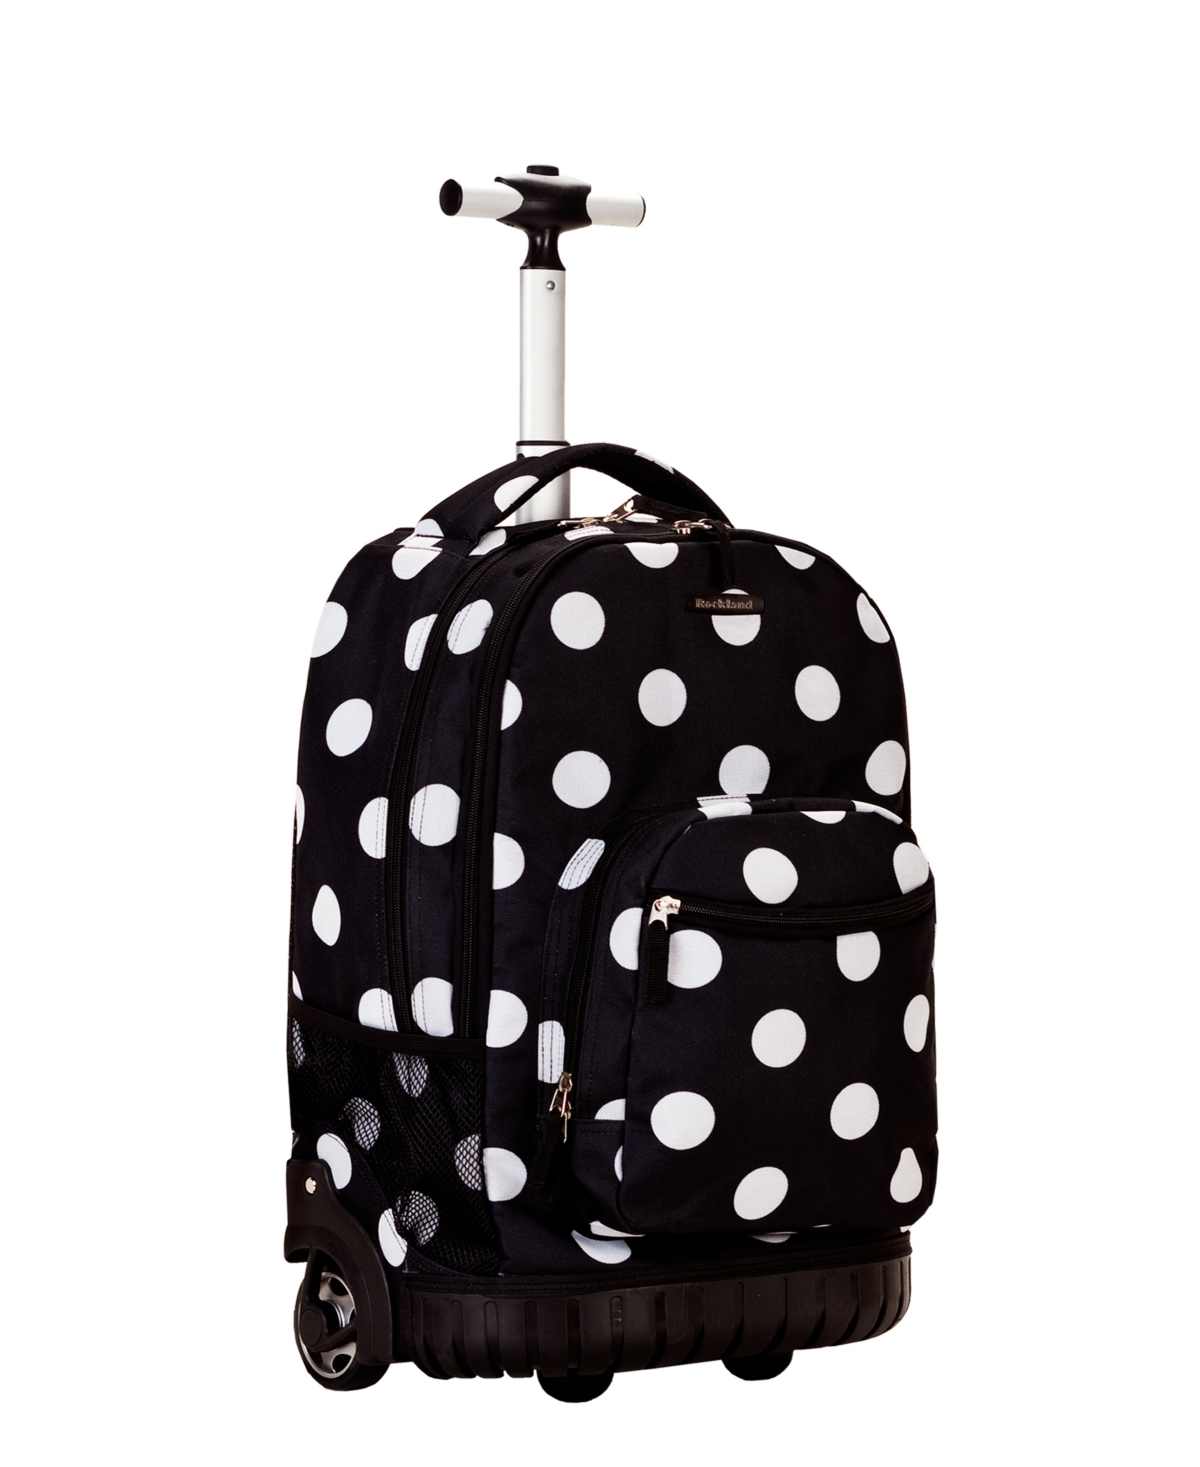 19" Rolling Backpack - Camo